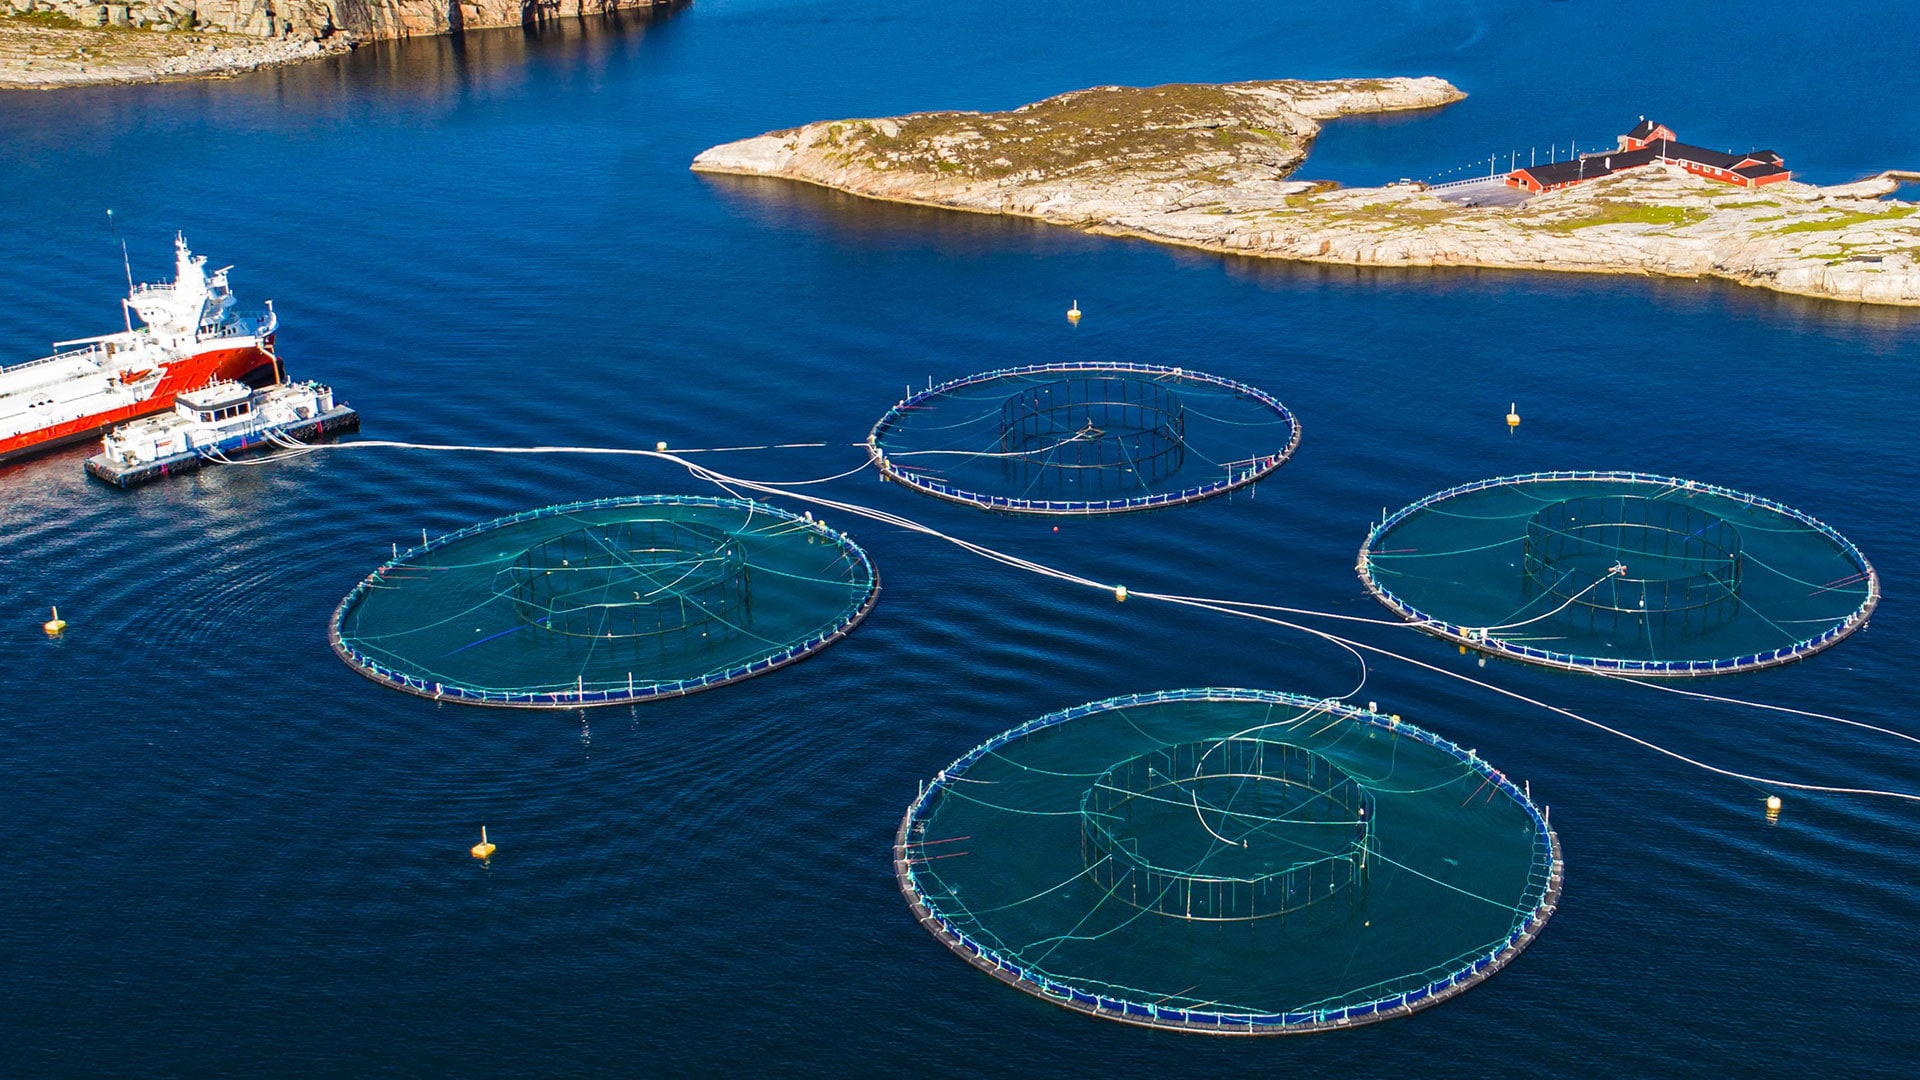 International examples offer US a blueprint for aquaculture regulation in 2020